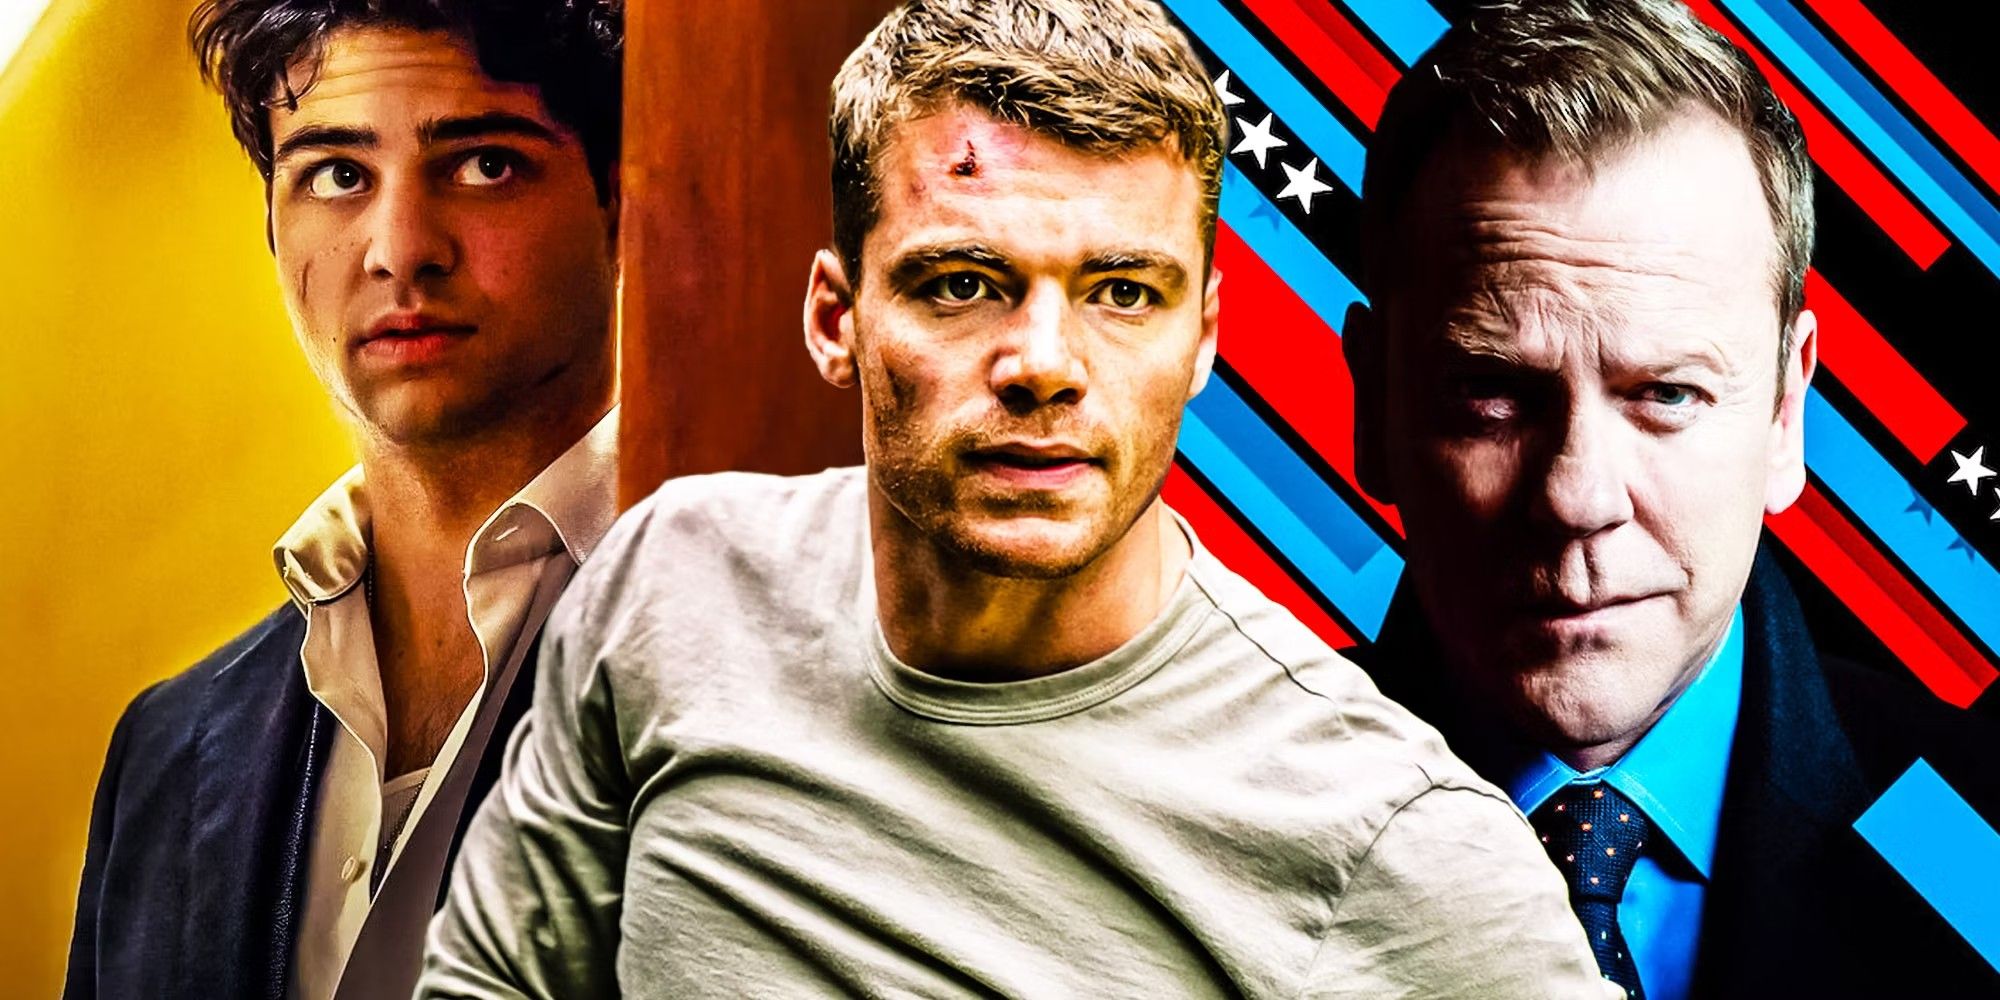 6 TV Shows To Watch After The Night Agent On Netflix